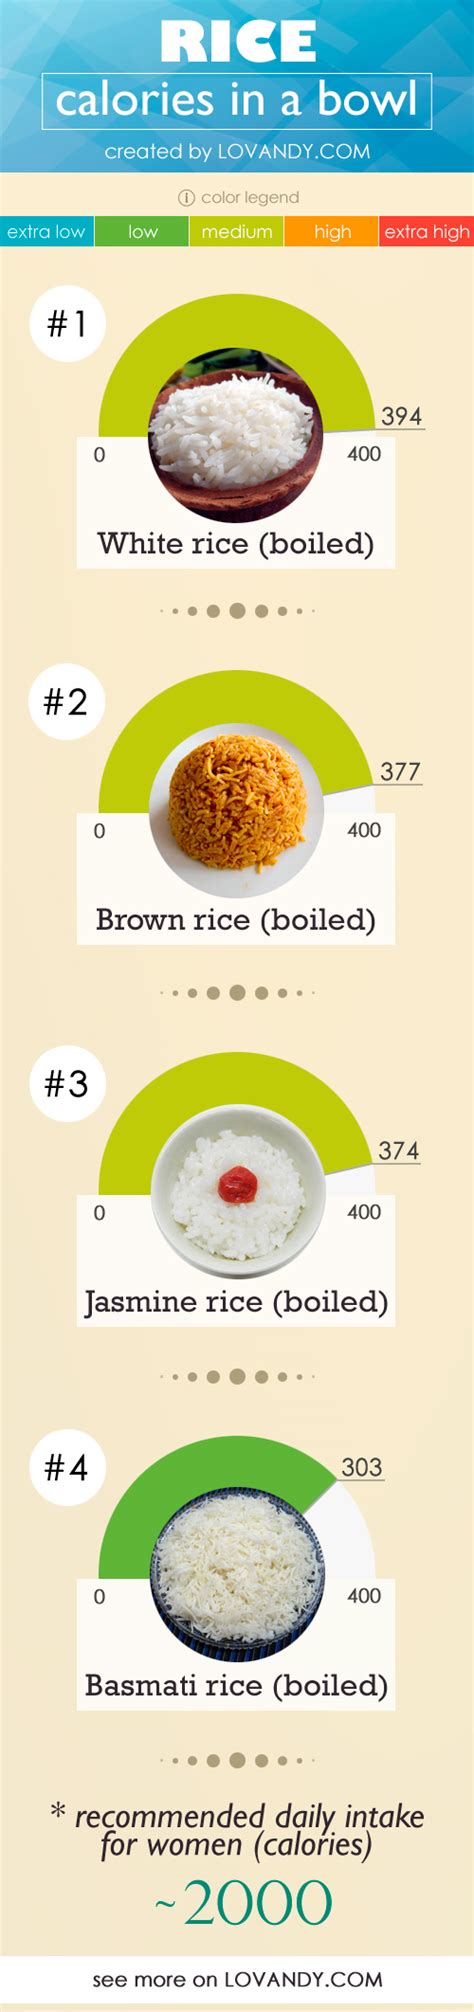 Red Rice Calories 100g